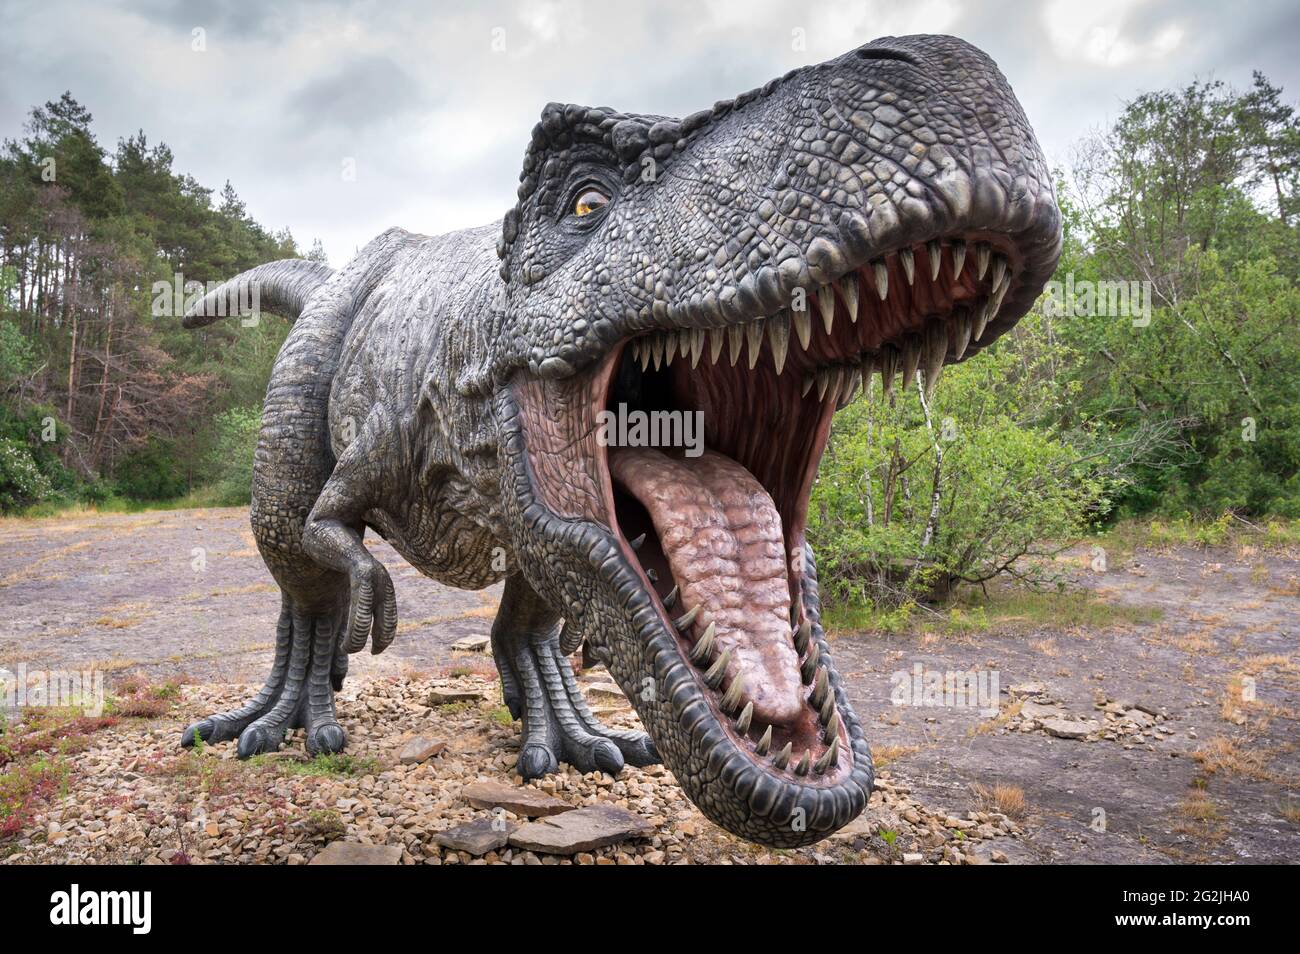 Dinosaur Tyrannosaurus as a model in Dinopark Münchehagen near Hanover. Lived in North America about 66 million years ago, was about 13m long and weighed 6t. Model: Wild Creations UK / Universal Pictures DE [M] Disturbing other dinosaurs have been retouched. Stock Photo